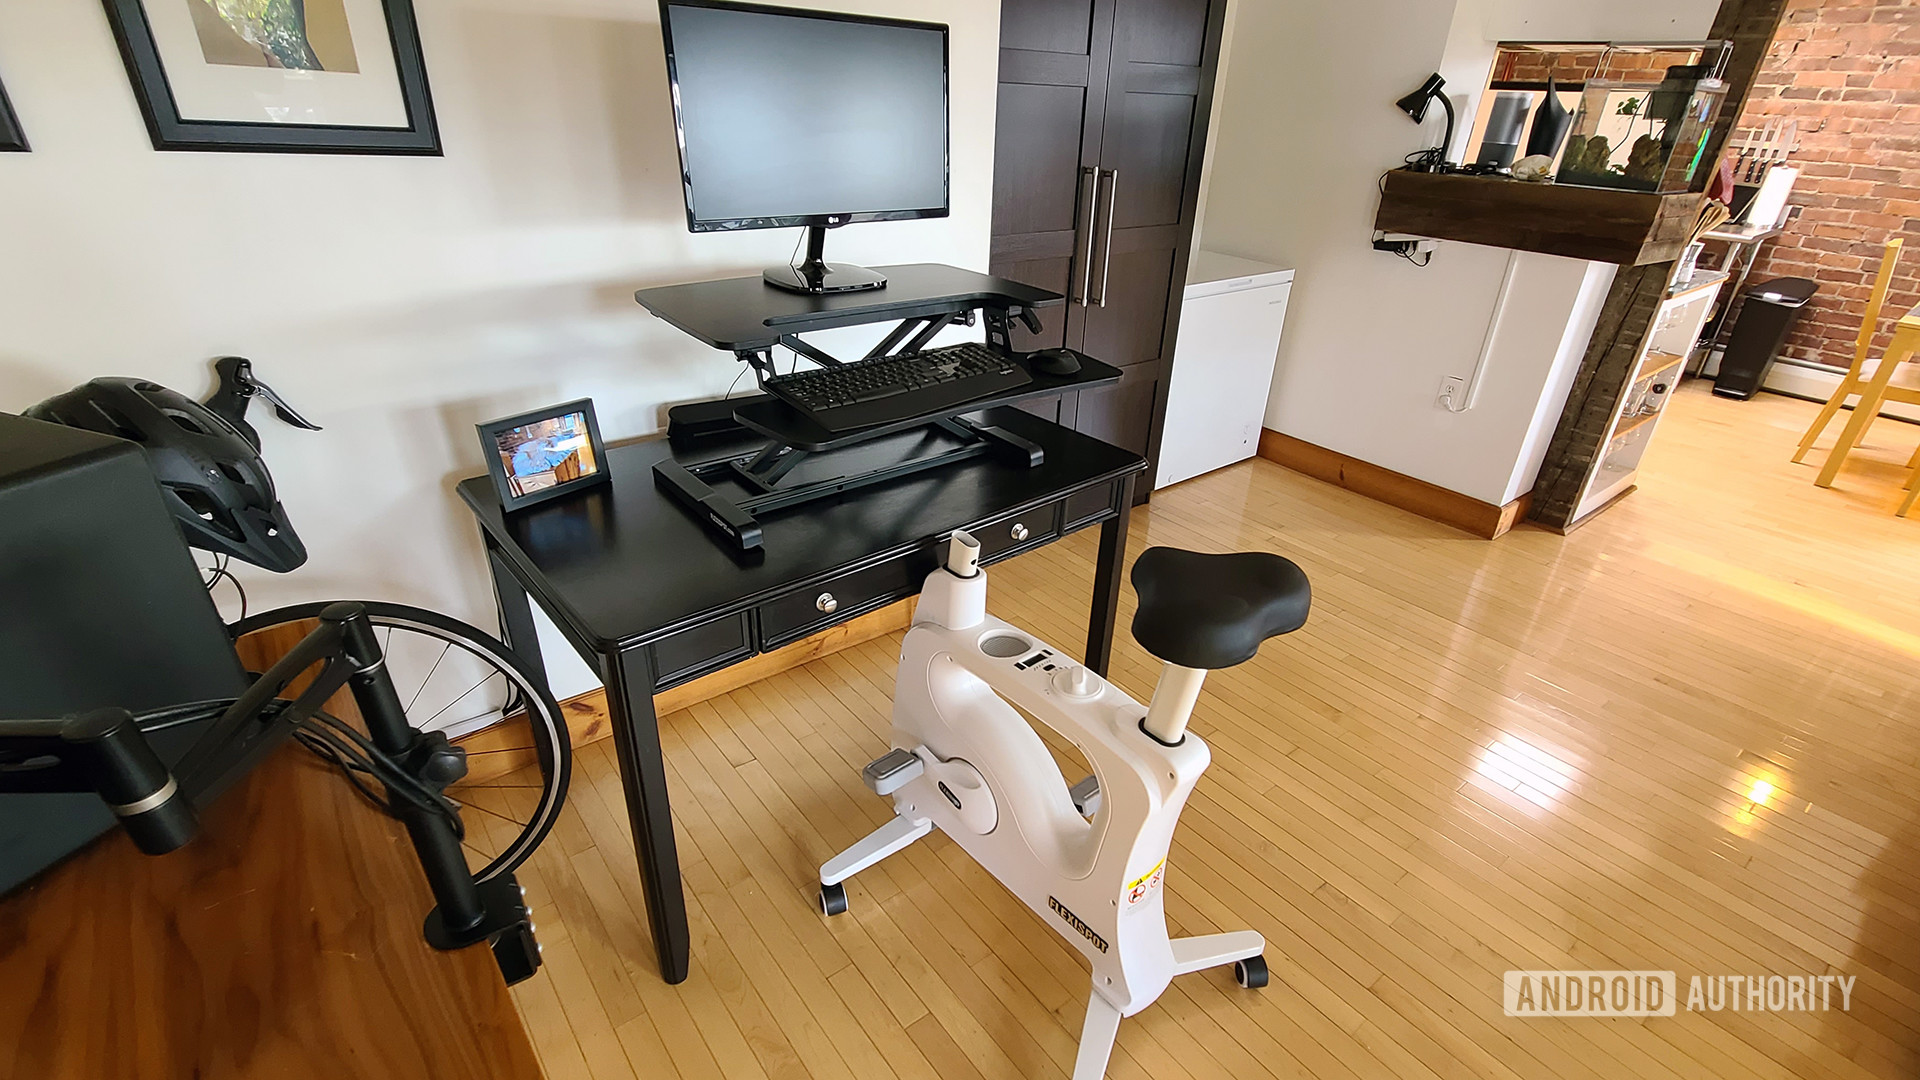 FlexiSpot Desk Bike Review without Desk at Standing Desk Wide Angle